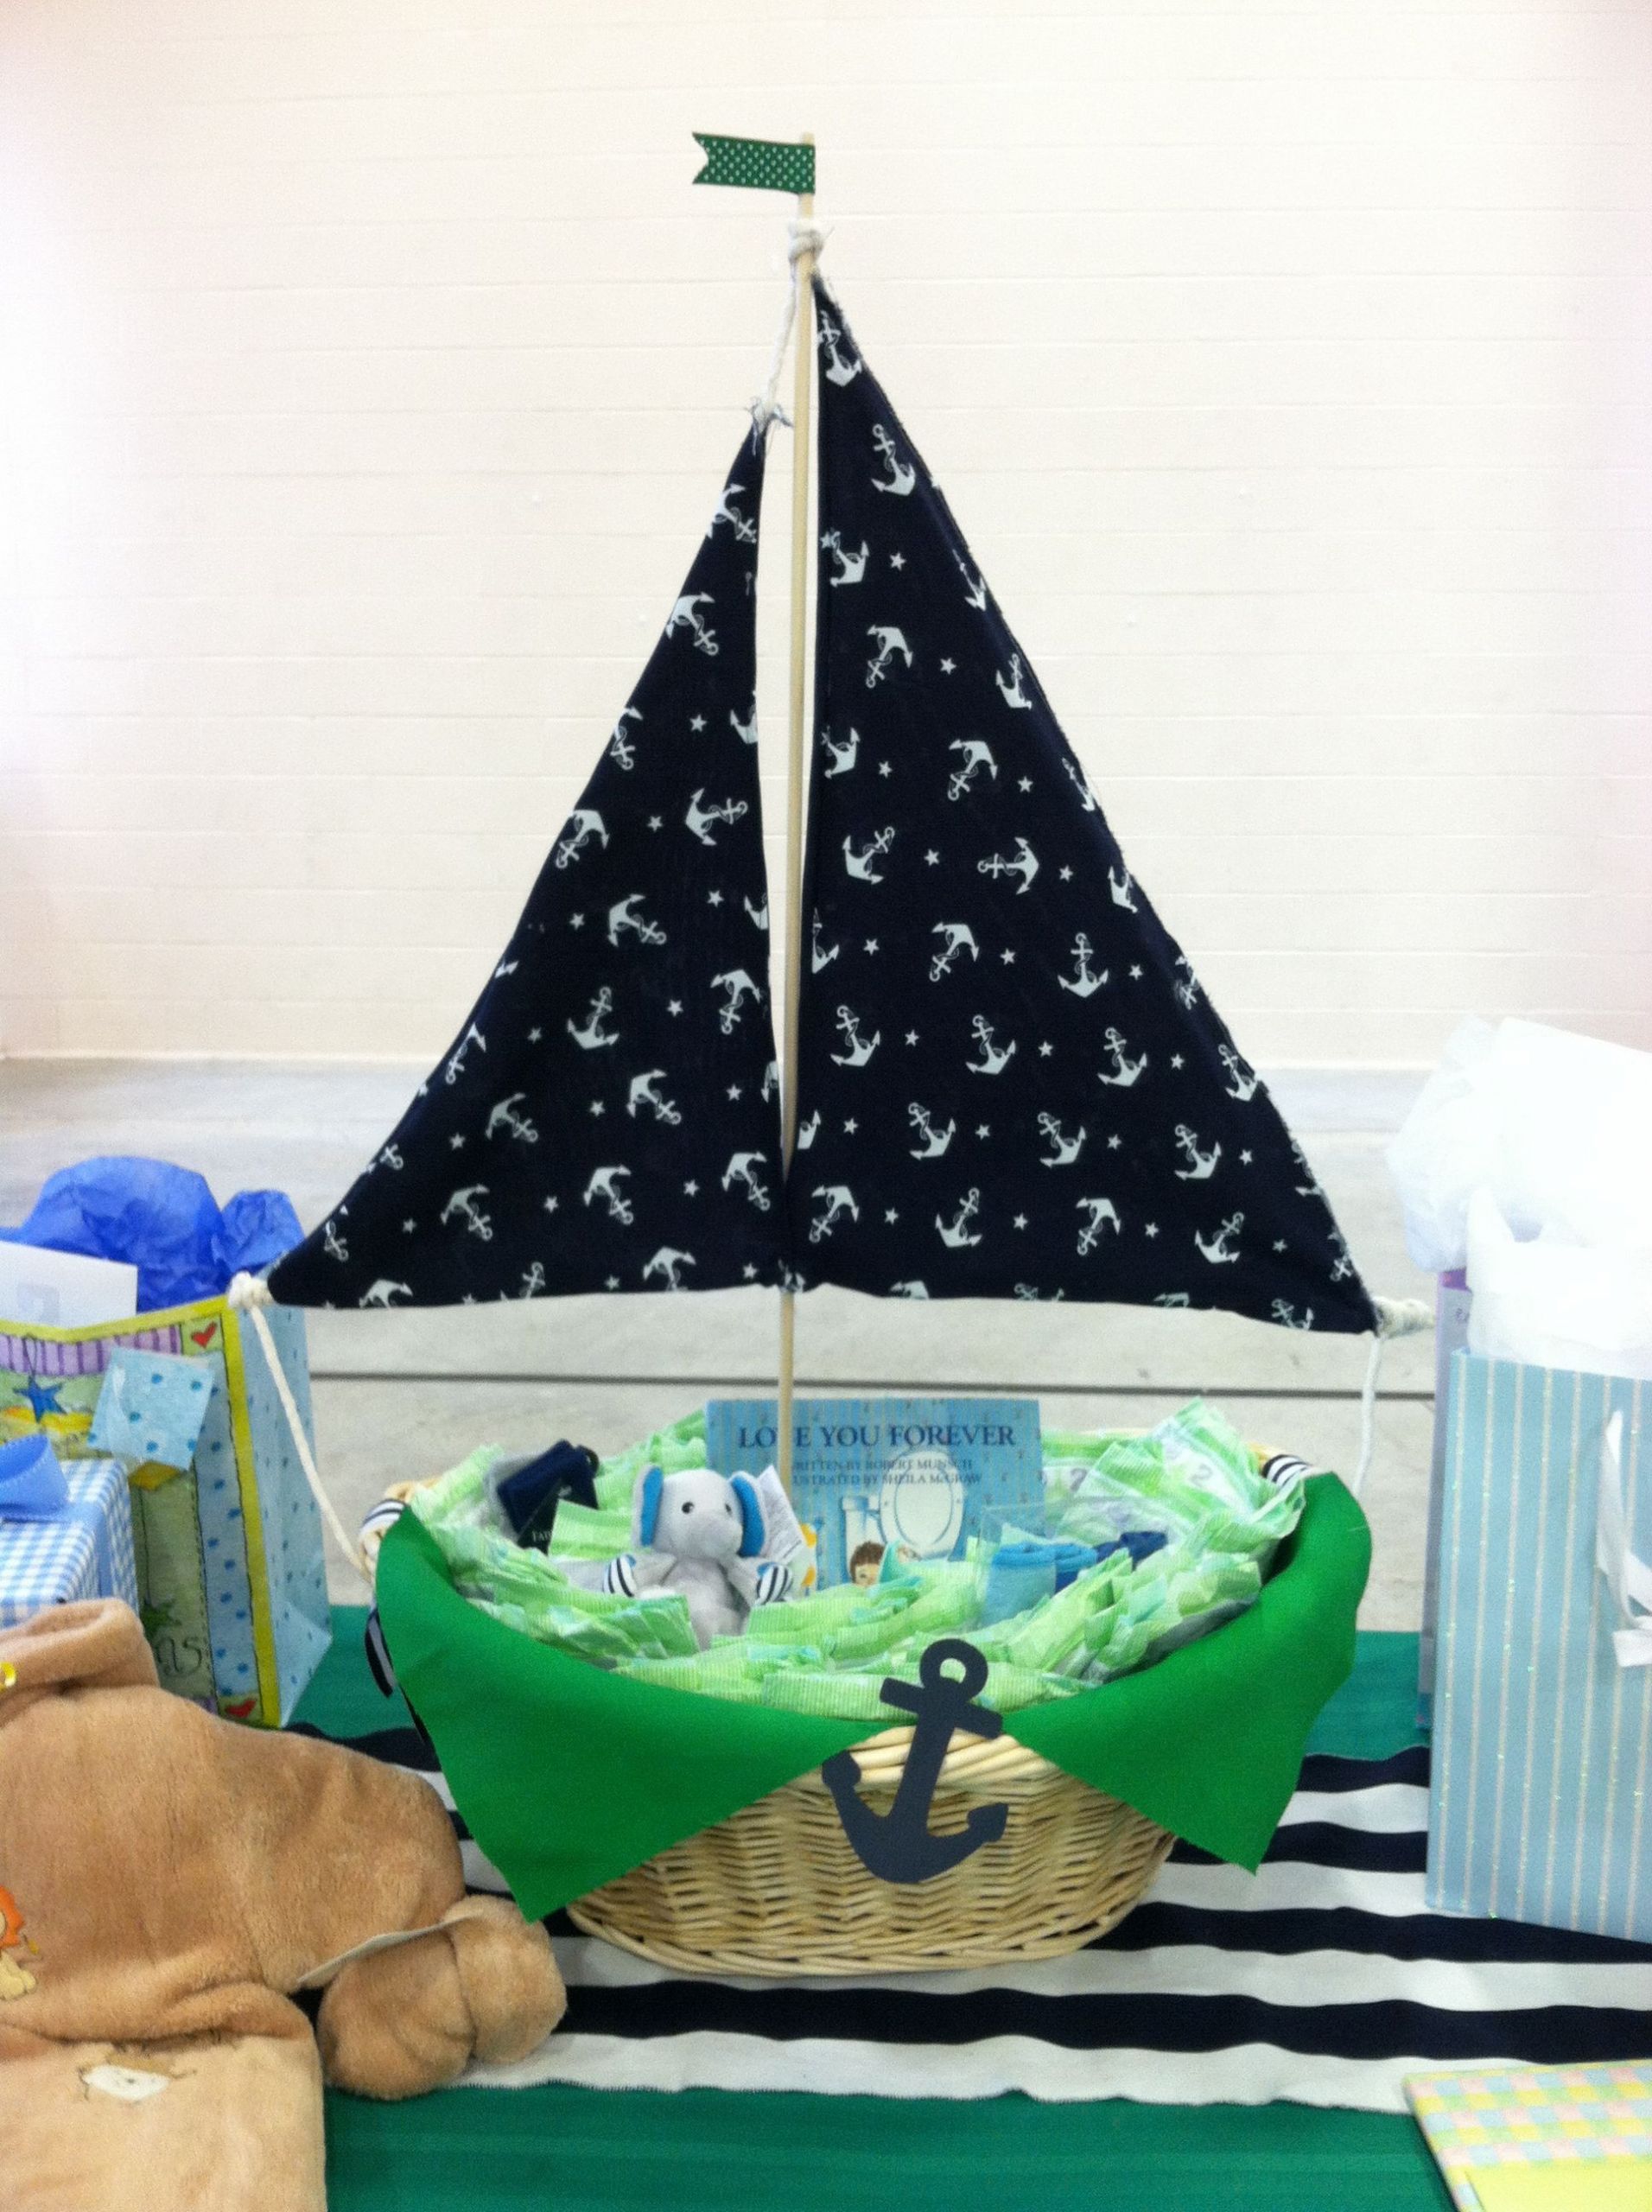 Nautical Baby Shower Gift Ideas
 Sail boat t basket that can be used in the nursery to